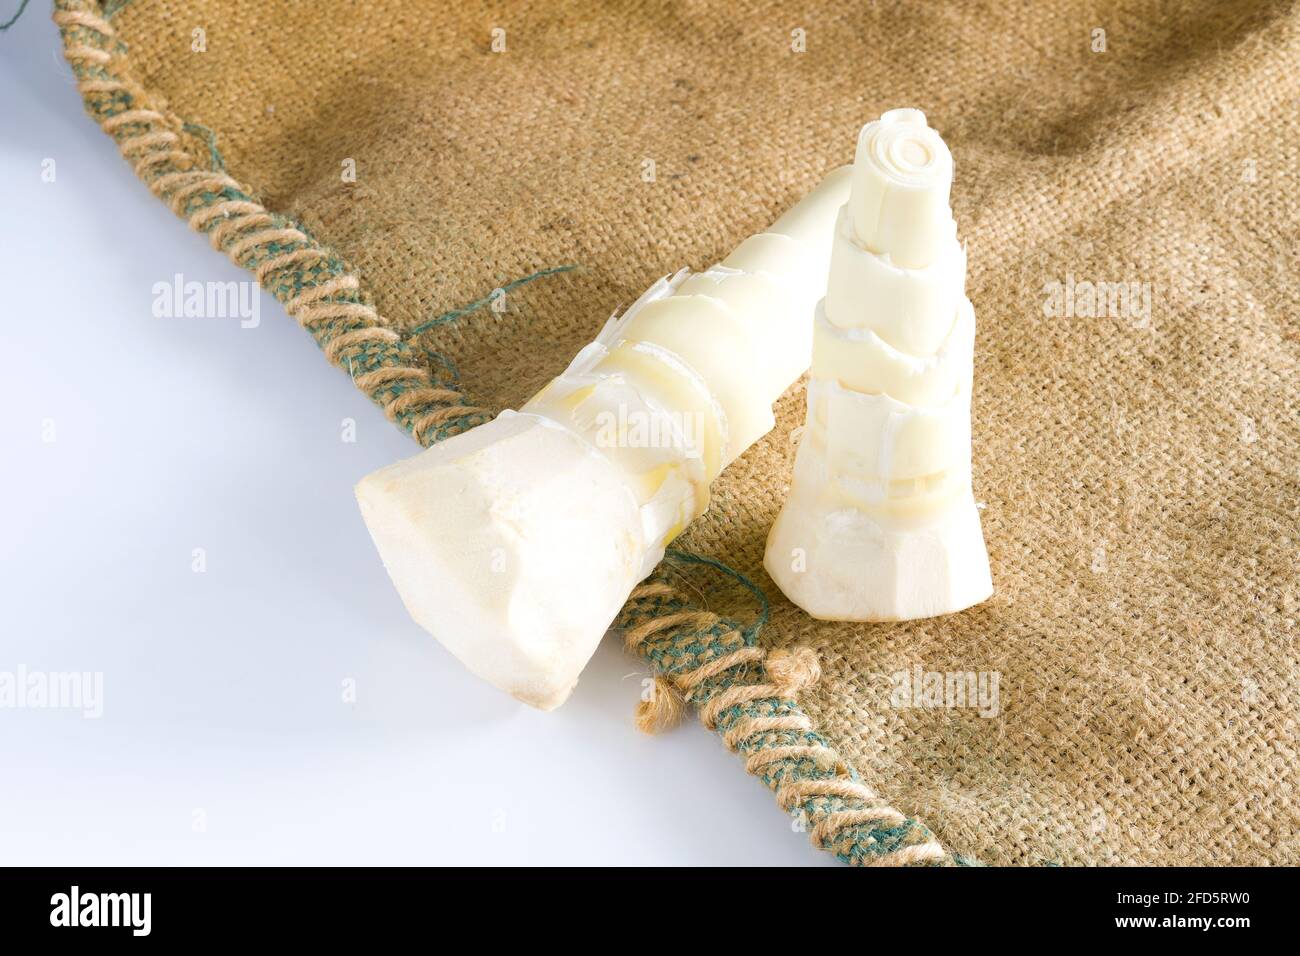 Bamboo shoots or bamboo sprouts are the edible shoots (new bamboo culms that come out of the ground) Preparing Bamboo Shoot. Stock Photo